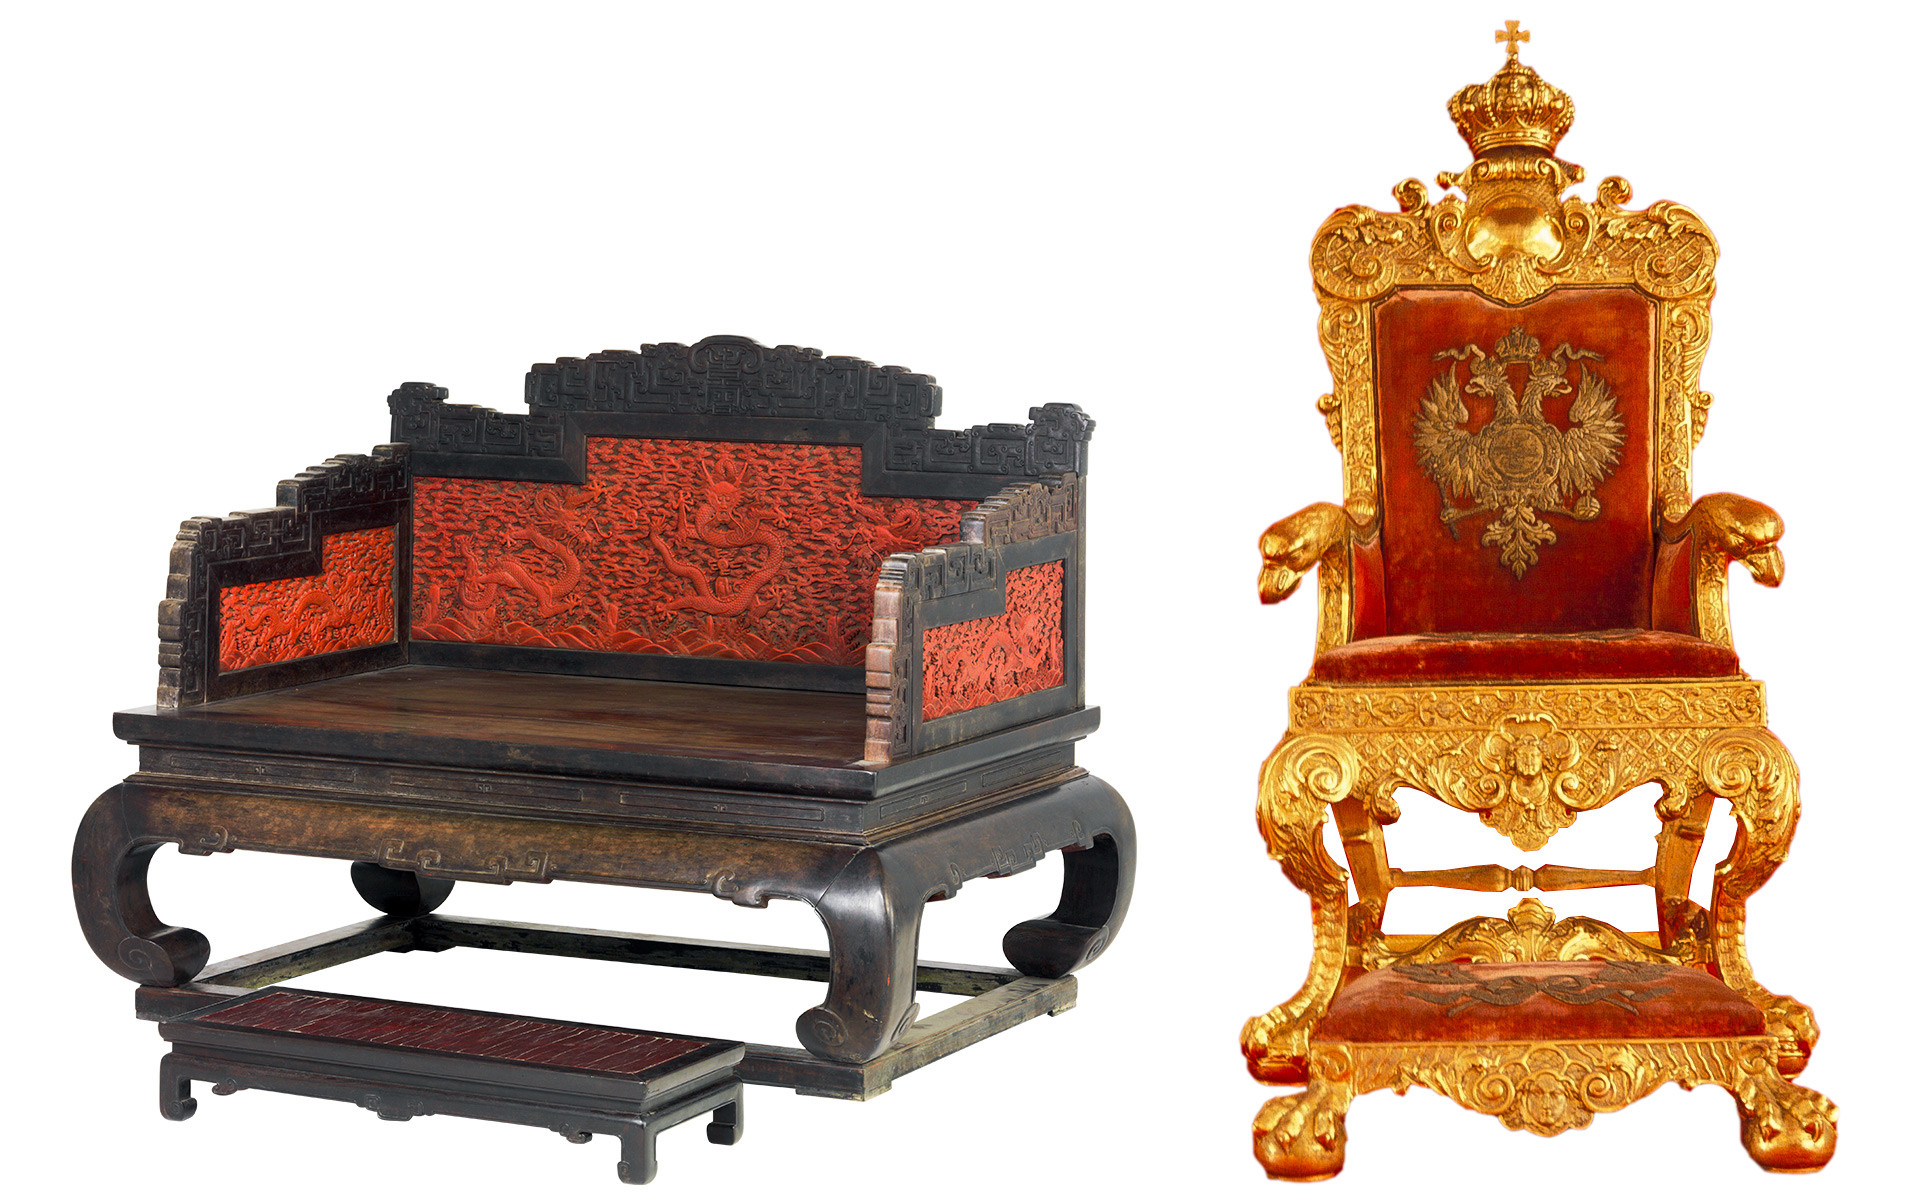 Left: Emperor's throne from the Quing era (1644-1912). Right: The throne of Paul I of Russia.